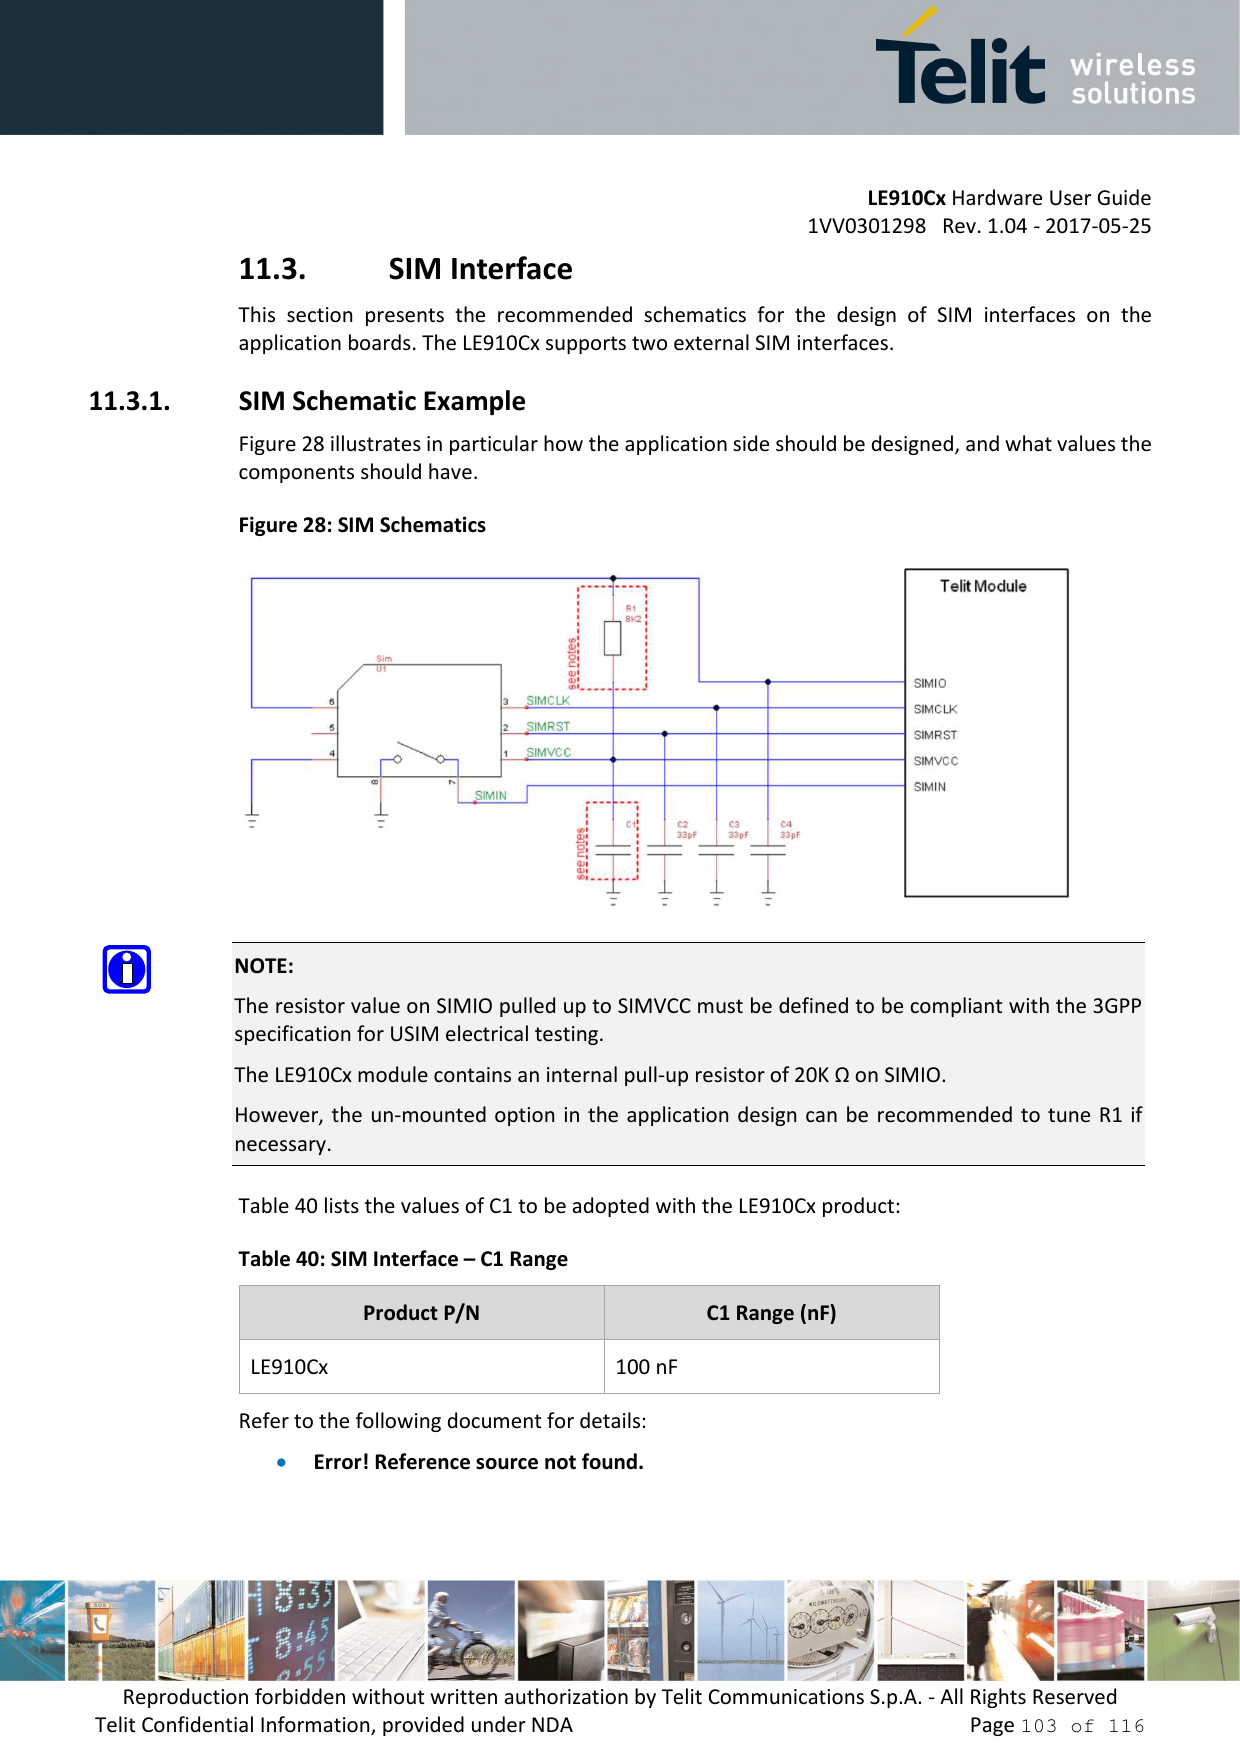         LE910Cx Hardware User Guide 1VV0301298   Rev. 1.04 - 2017-05-25 Reproduction forbidden without written authorization by Telit Communications S.p.A. - All Rights Reserved Telit Confidential Information, provided under NDA                 Page 103 of 116 11.3. SIM Interface This  section  presents  the  recommended  schematics  for  the  design  of  SIM  interfaces  on  the application boards. The LE910Cx supports two external SIM interfaces. 11.3.1. SIM Schematic Example Figure 28 illustrates in particular how the application side should be designed, and what values the components should have. Figure 28: SIM Schematics   NOTE: The resistor value on SIMIO pulled up to SIMVCC must be defined to be compliant with the 3GPP specification for USIM electrical testing. The LE910Cx module contains an internal pull-up resistor of 20K Ω on SIMIO. However, the  un-mounted option in the application design can  be recommended to tune  R1 if necessary. Table 40 lists the values of C1 to be adopted with the LE910Cx product: Table 40: SIM Interface – C1 Range Product P/N  C1 Range (nF) LE910Cx  100 nF Refer to the following document for details: • Error! Reference source not found.  